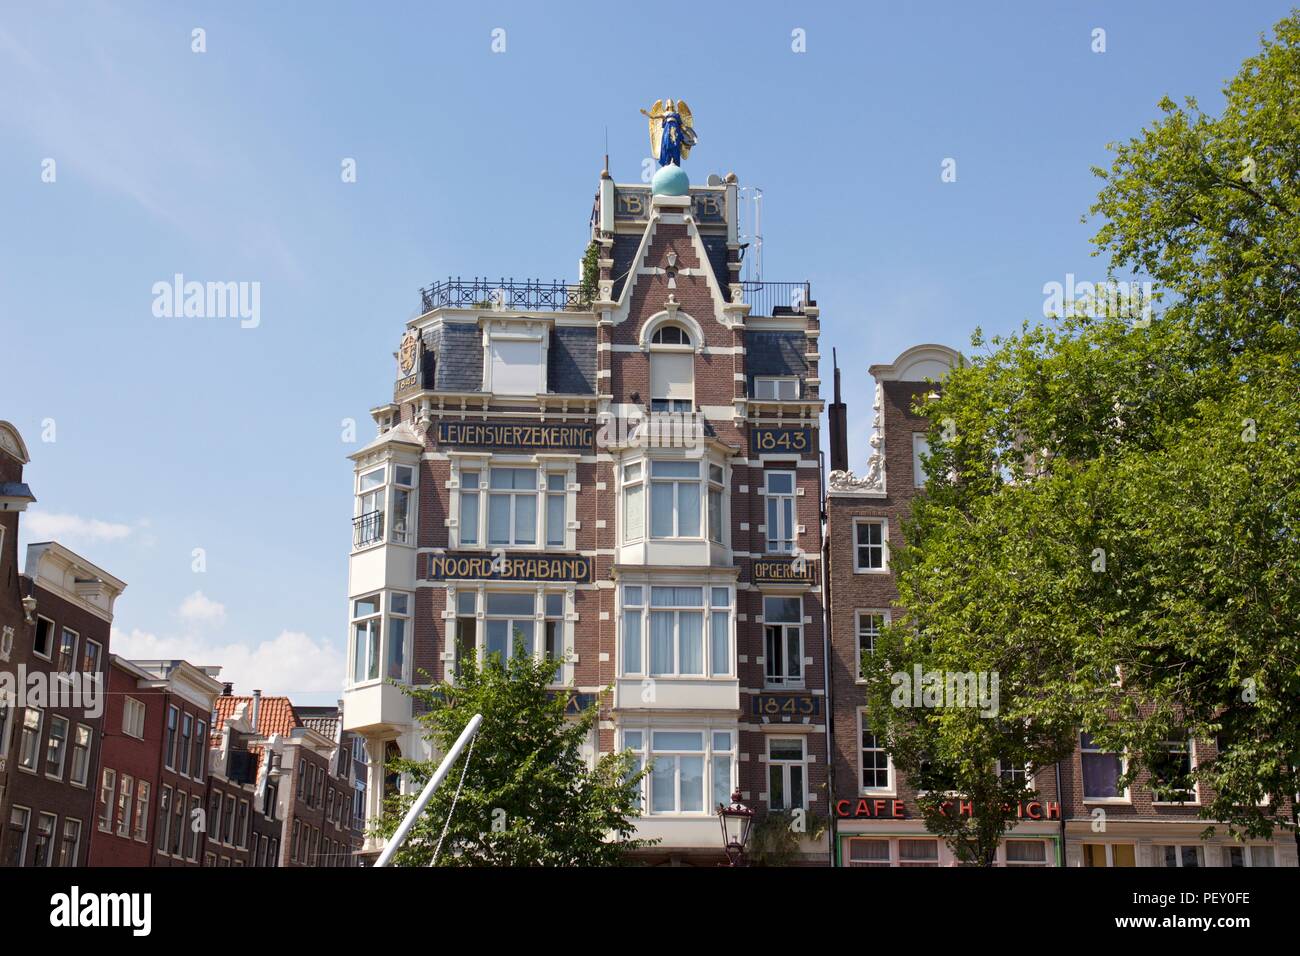 The former building for Levensverzekering Noord-Braband, a life insurance company on the corner of Singel and Haarlemmerstraat,  Amstedam, Netherlands Stock Photo